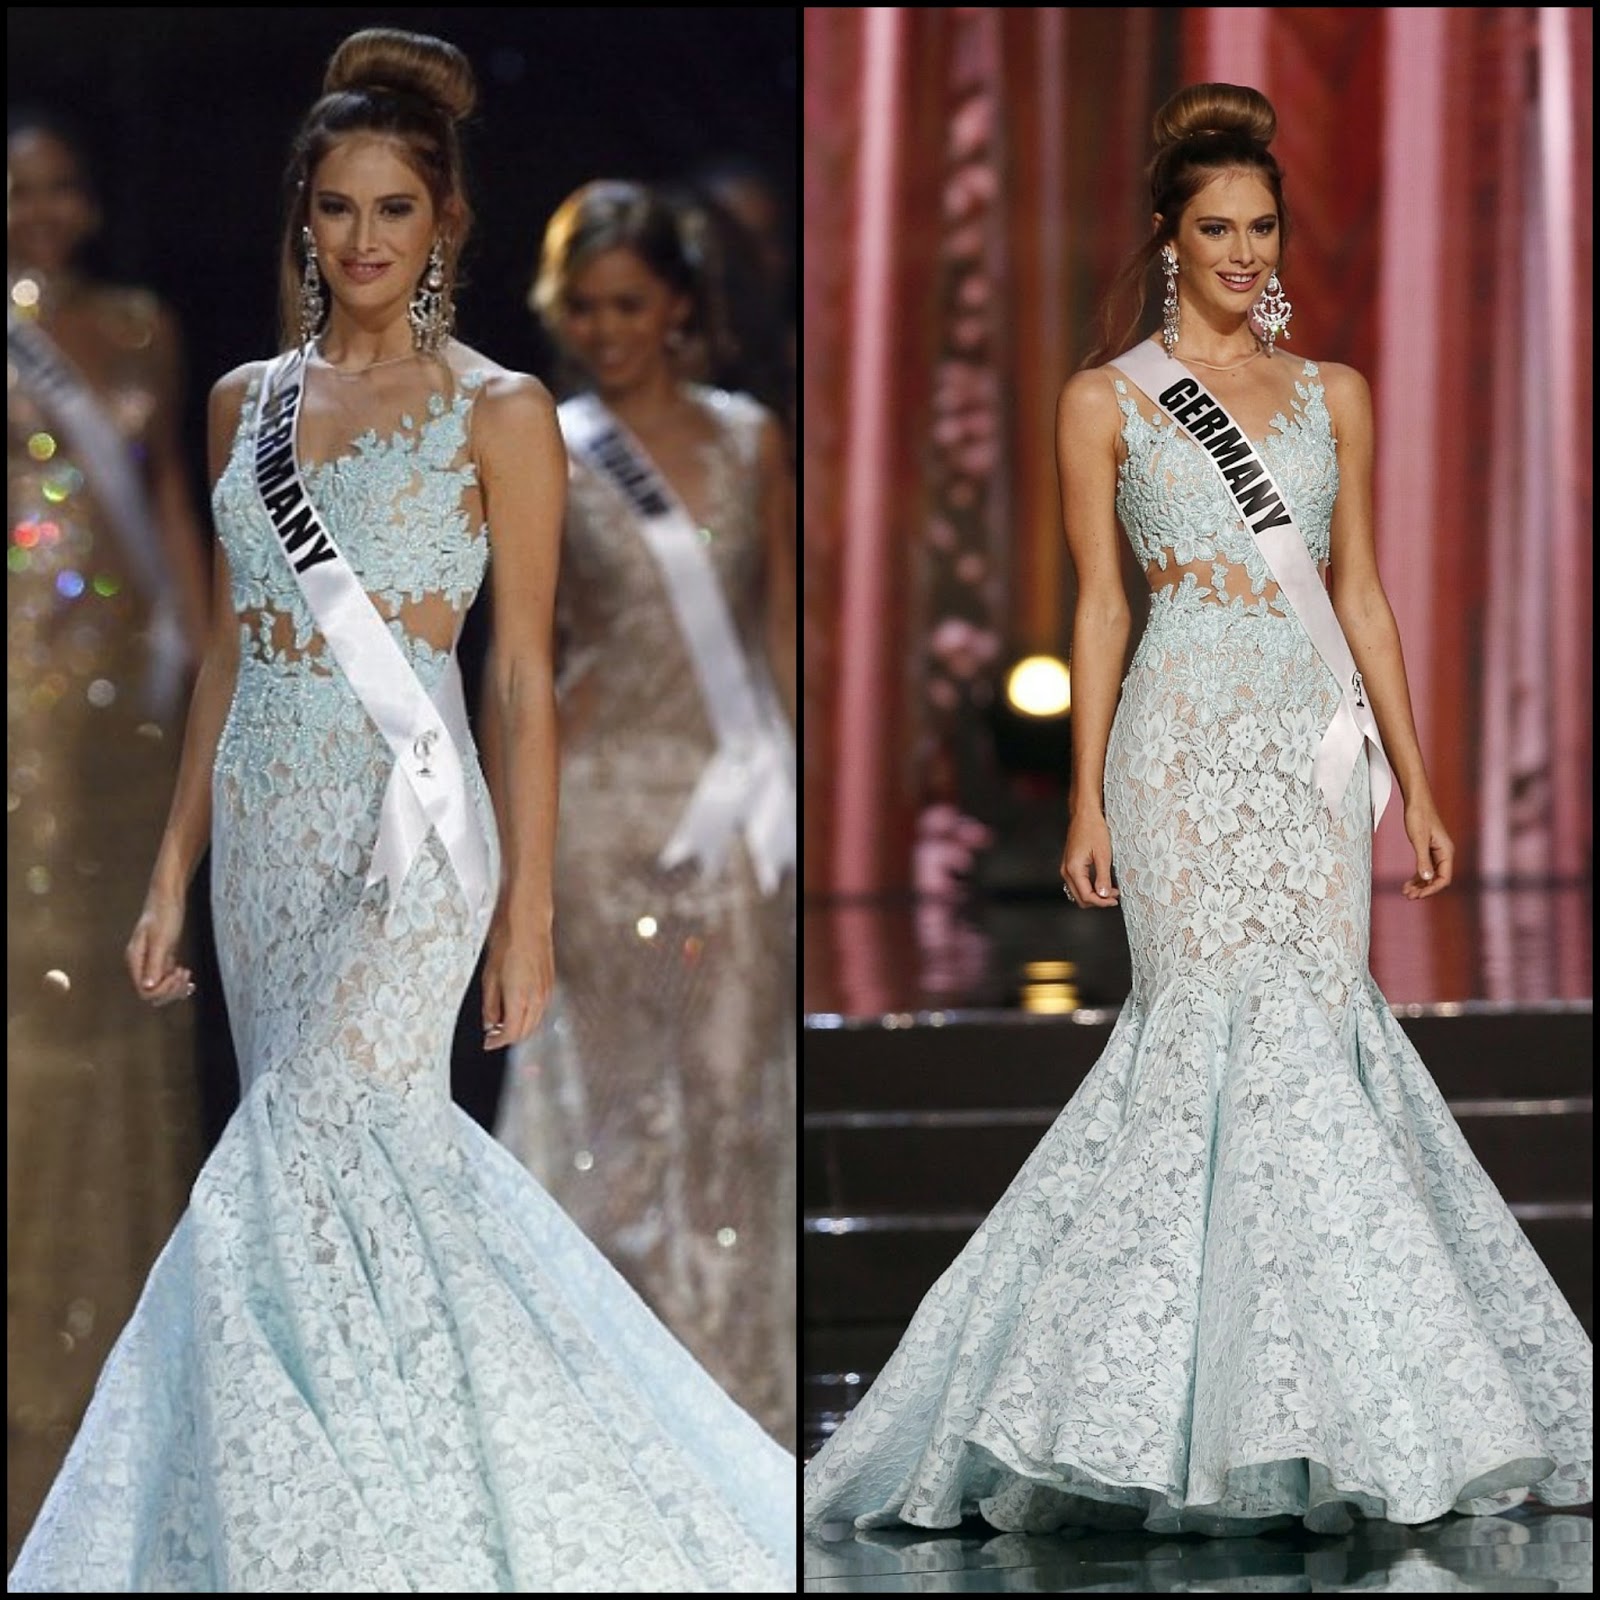 Miss Universe 2018: Top 10 Evening Gowns Competition | Pageant evening gowns,  Miss universe dresses, Miss universe gowns